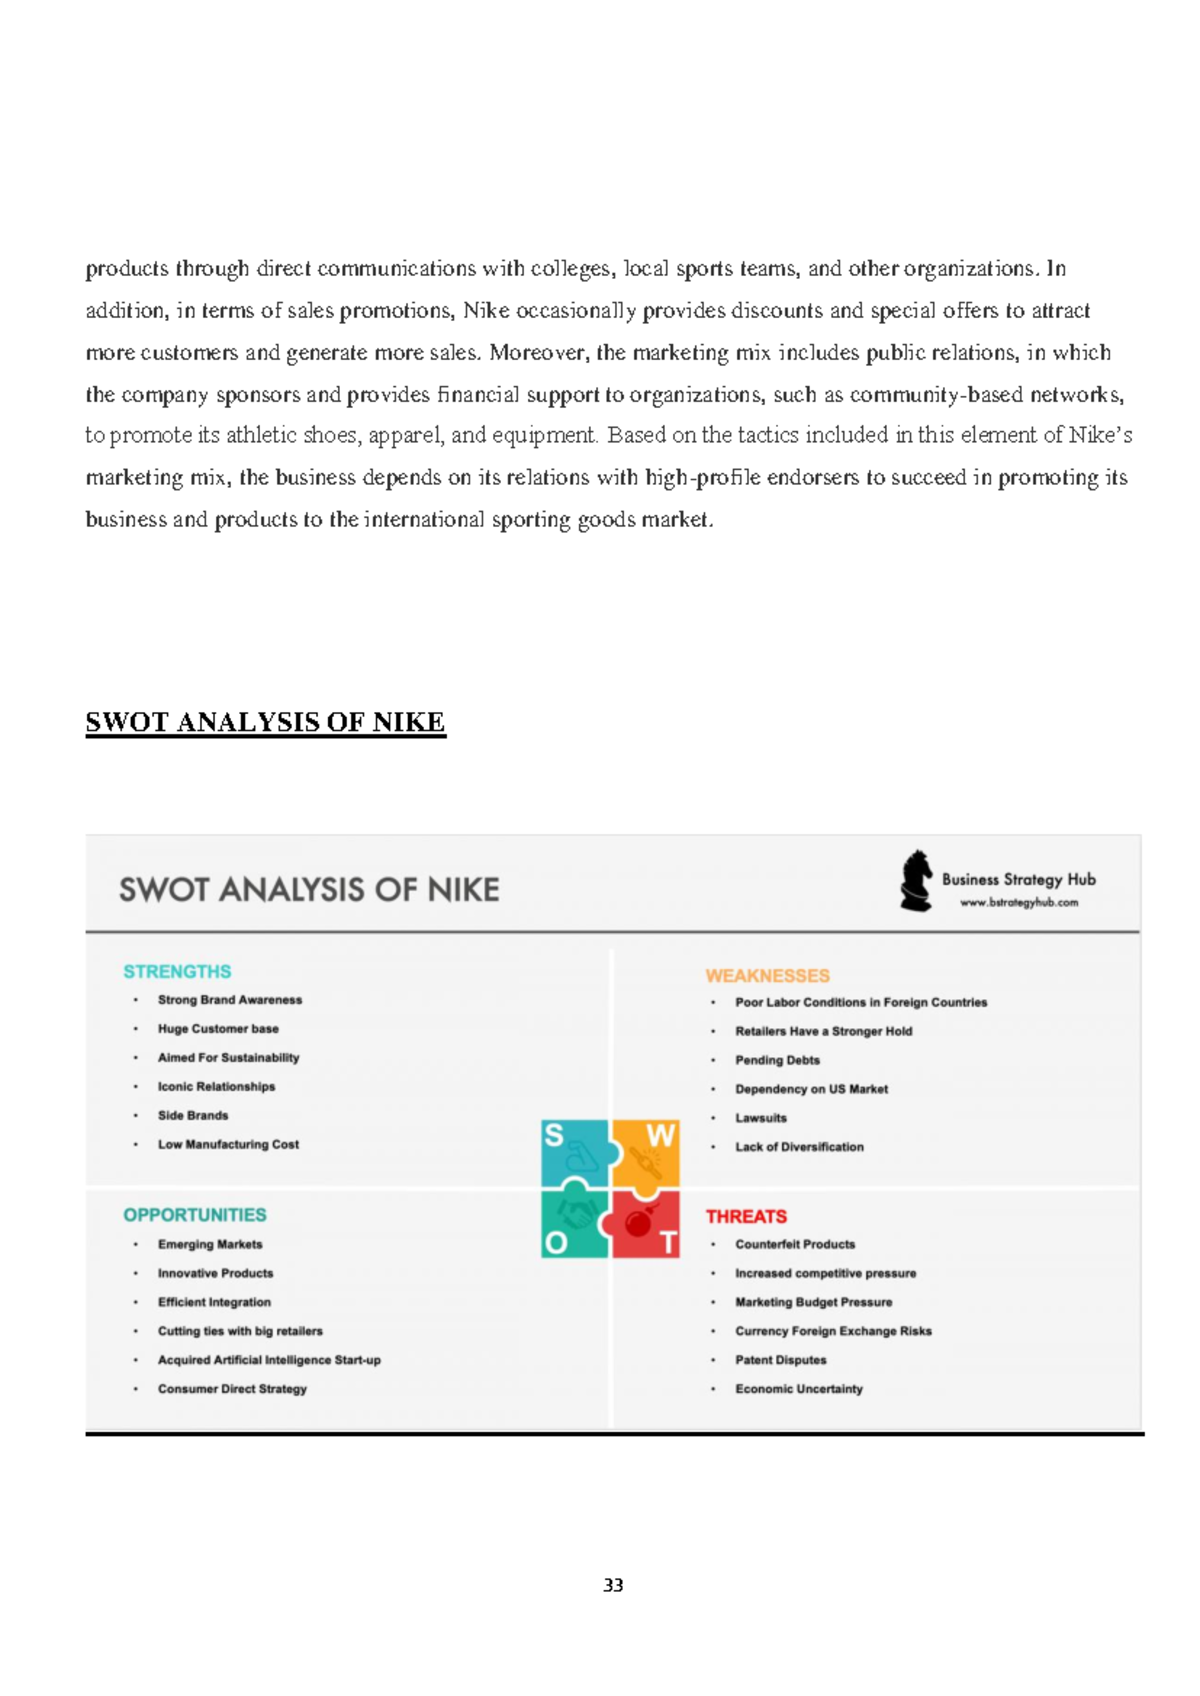 Swot Analysis Nike Products Through Direct Communications With